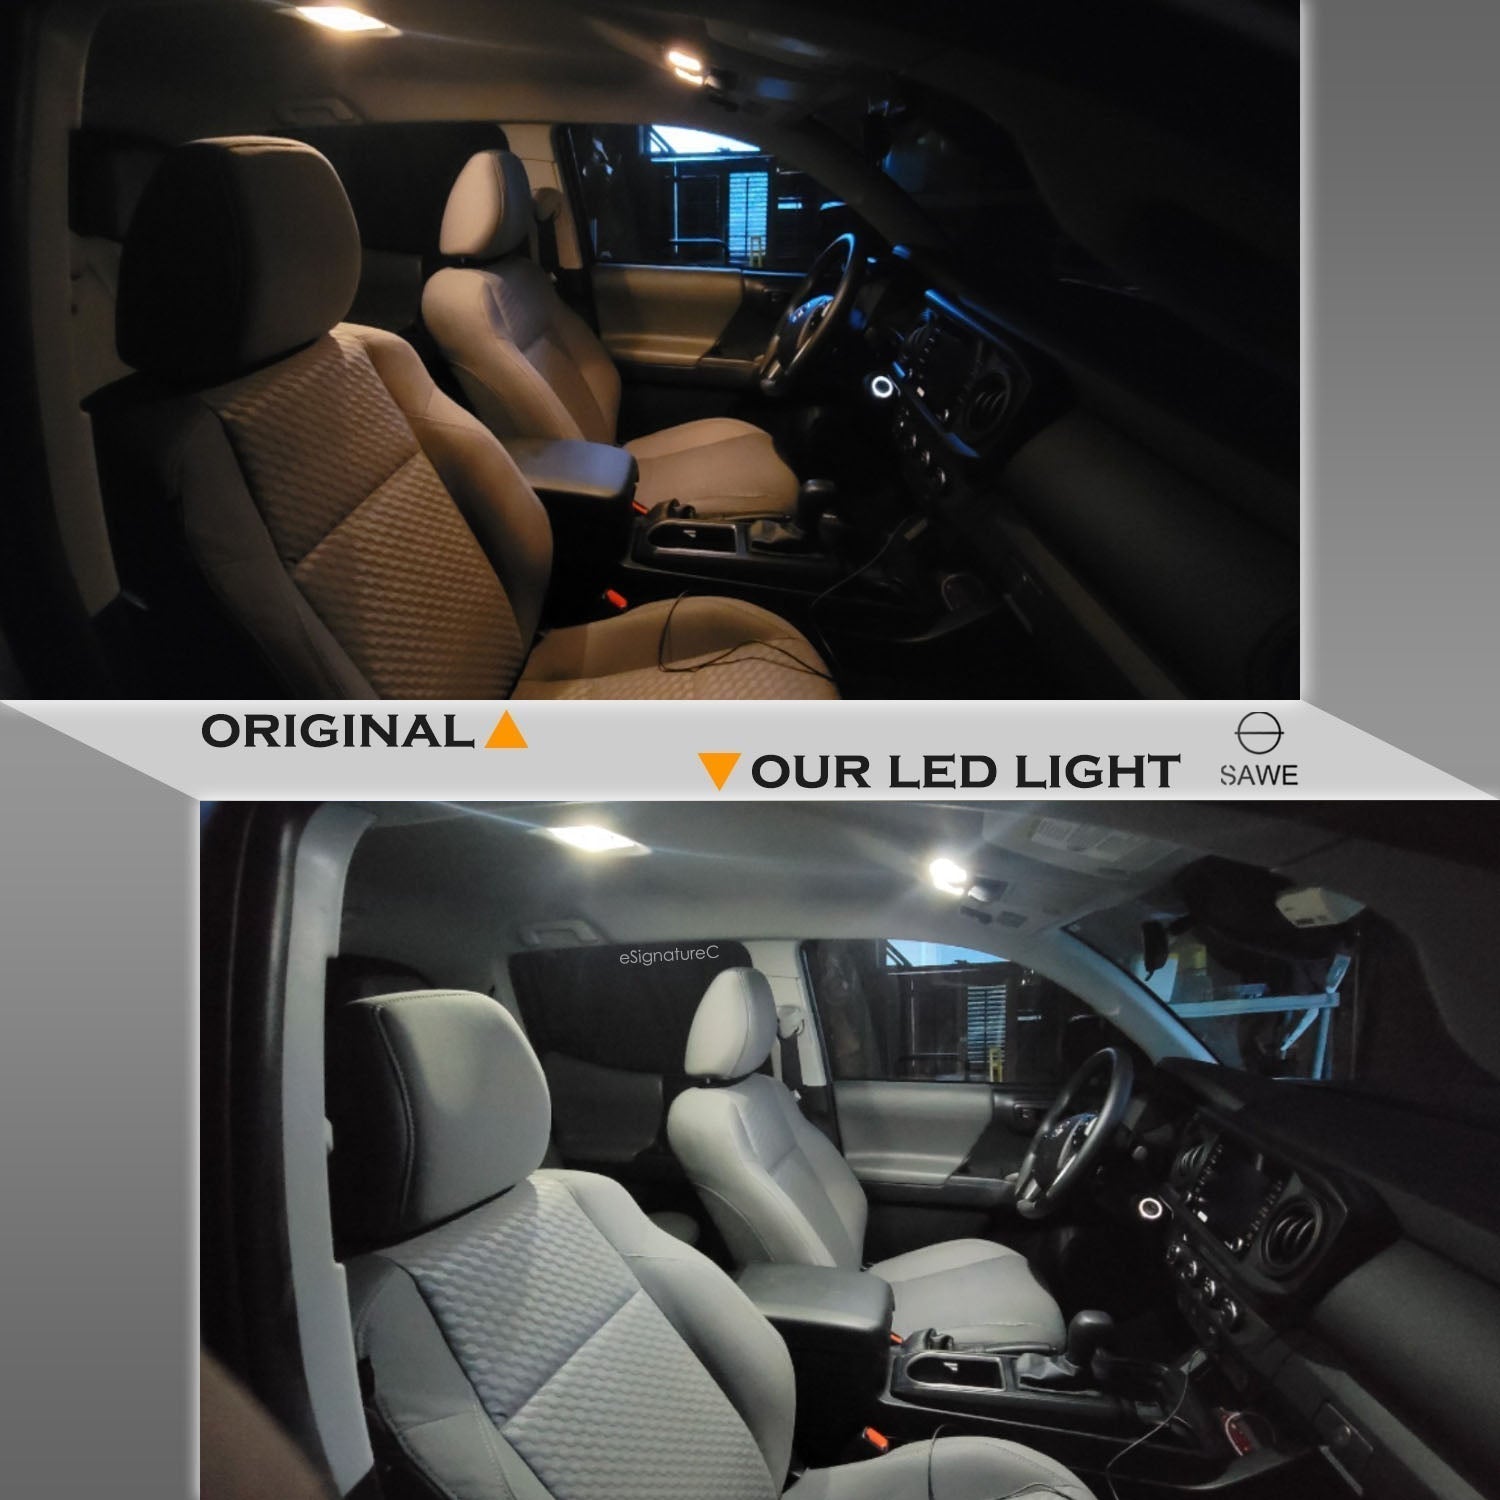 For Toyota Tundra Interior LED Lights - Dome & Map Lights Package Kit for 2007 - 2021 - White